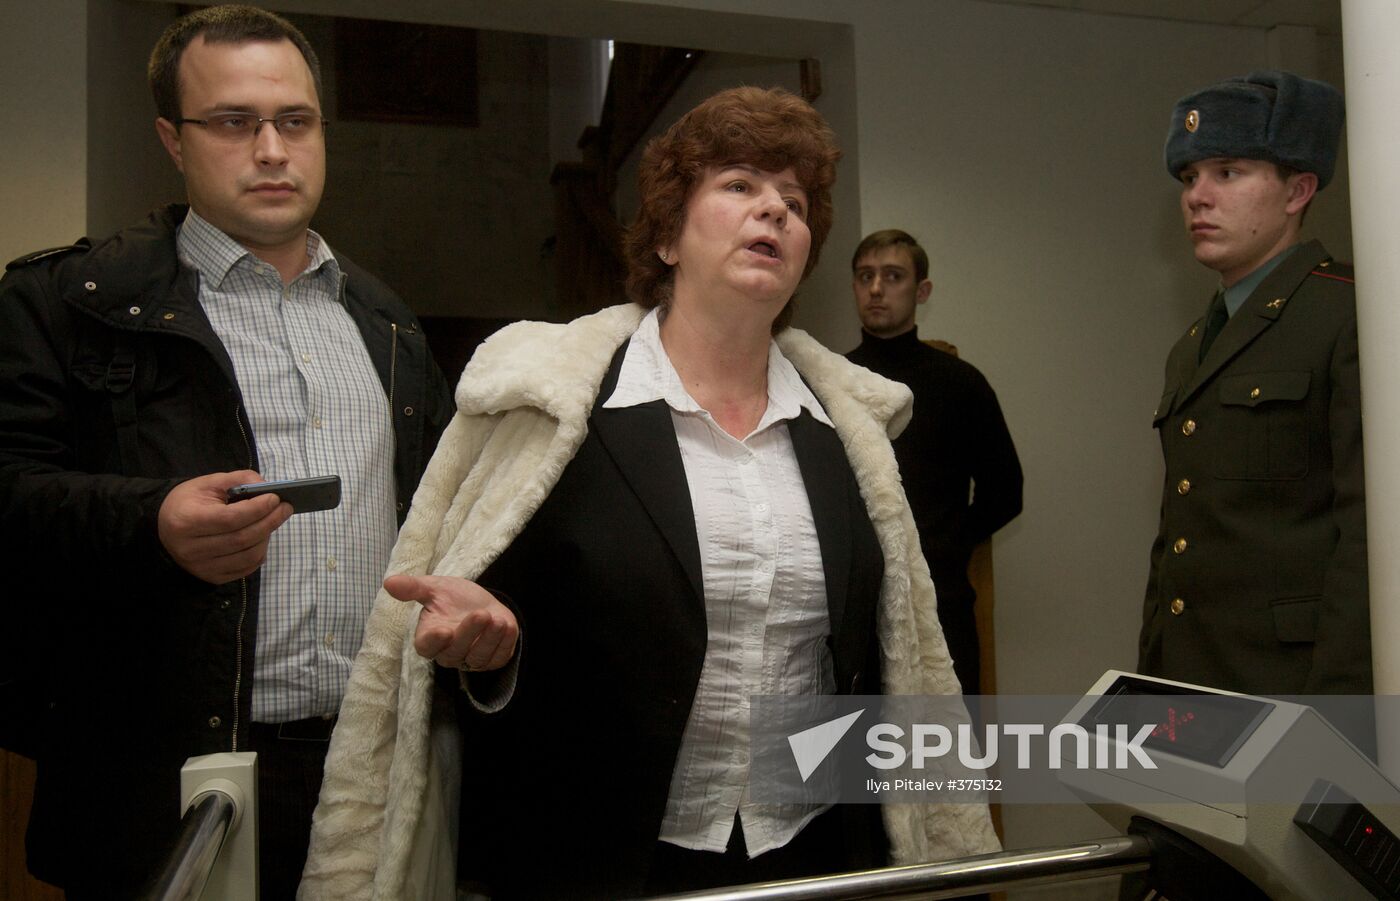 Acquittal for the accused in the Anna Politkovskaya murder case